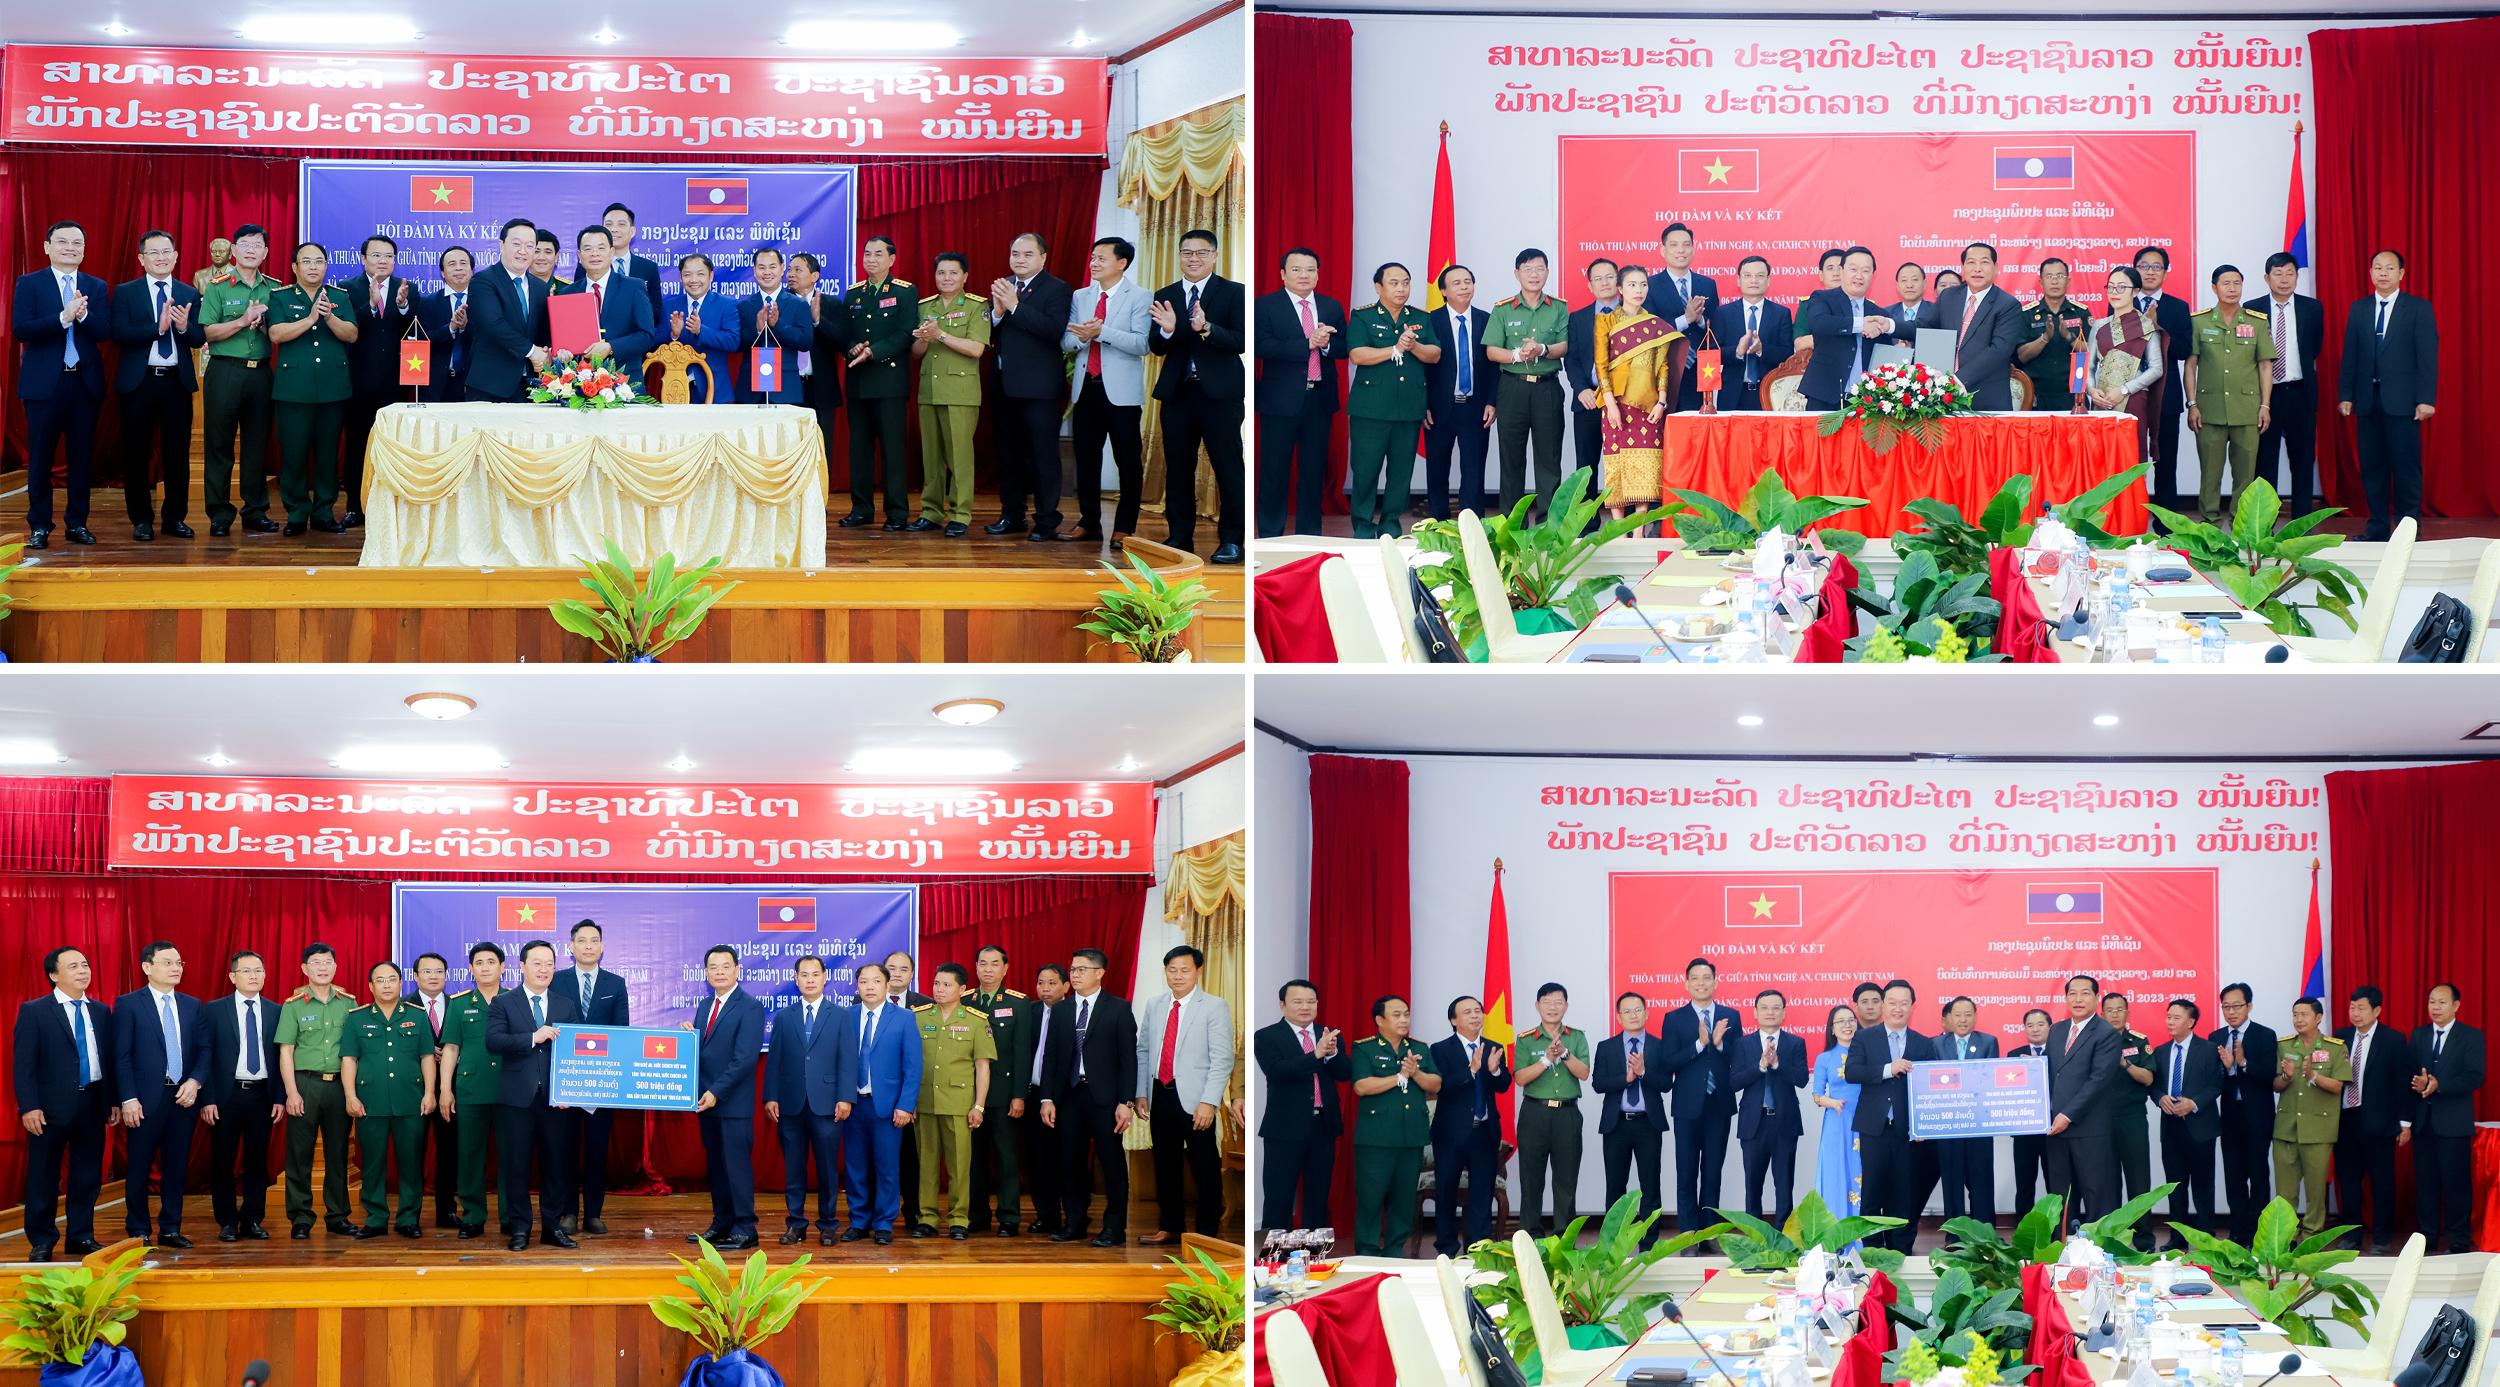 The leaders of Nghe An province and the provinces of Houaphanh and Xiengkhouang sign a cooperation agreement for the 2023-2025 period (2 above photos); Nghe An province presents Houaphanh and Xiengkhouang with VND 500 million each to equip with computers and other devices. Photo: Pham Bang